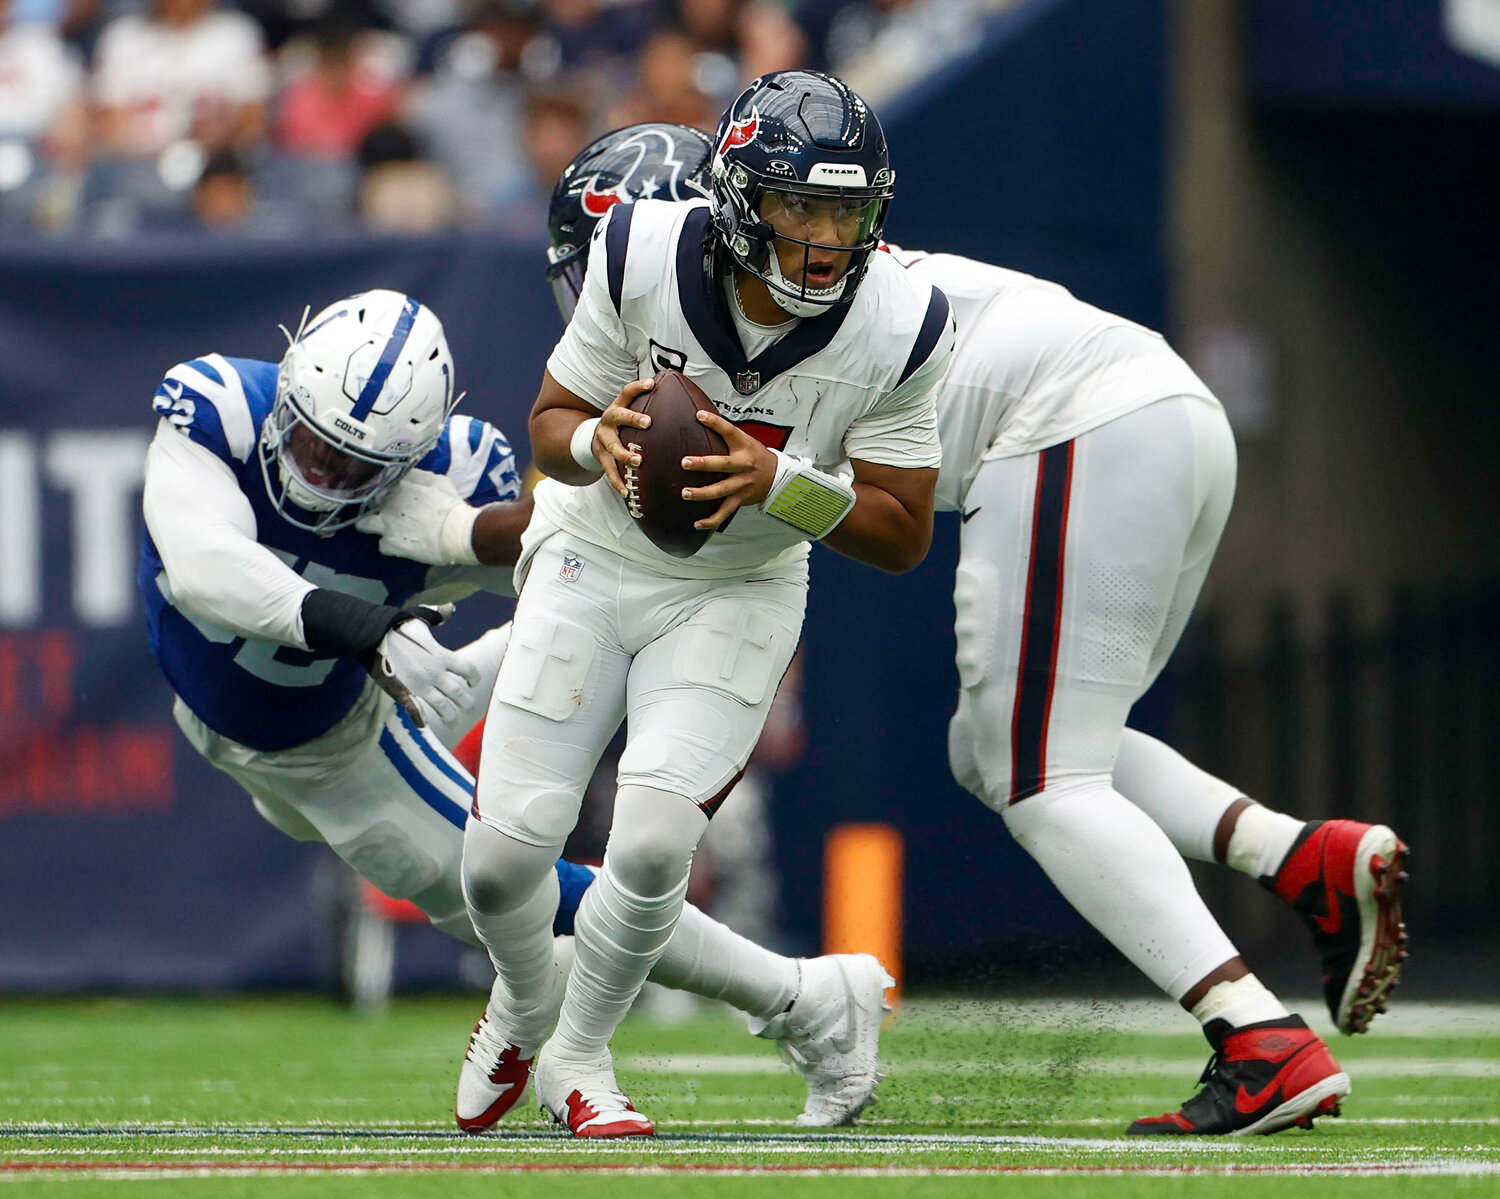 Texans quarterback C.J. Stroud (7) works to escape pressure as Colts defensive end Samson Ebukam (52) is blocked behind him during an NFL game between the Texans and the Colts on September 17, 2023 in Houston. The Colts won, 31-20.